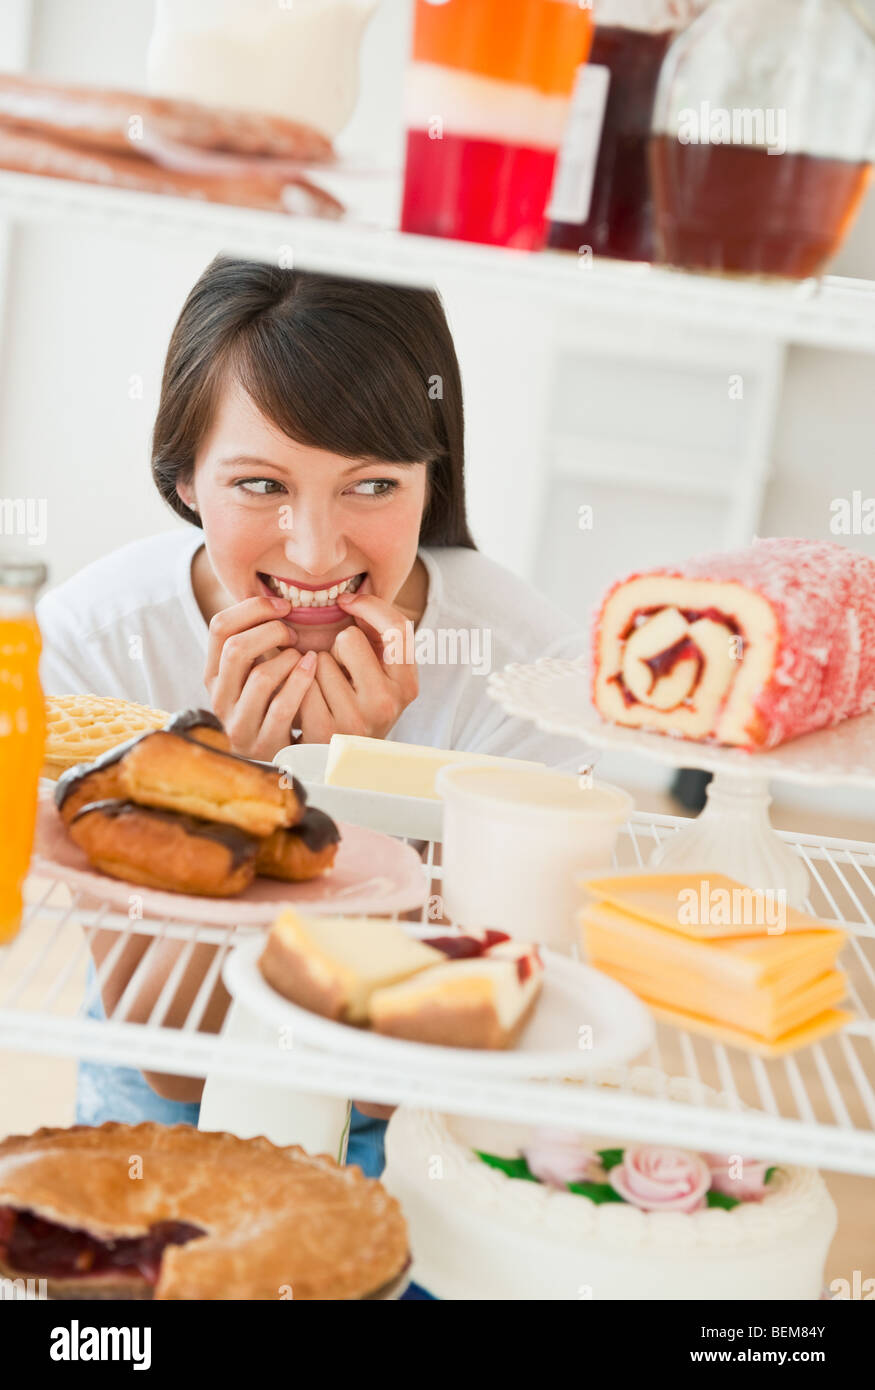 Woman looking at sweets Stock Photo